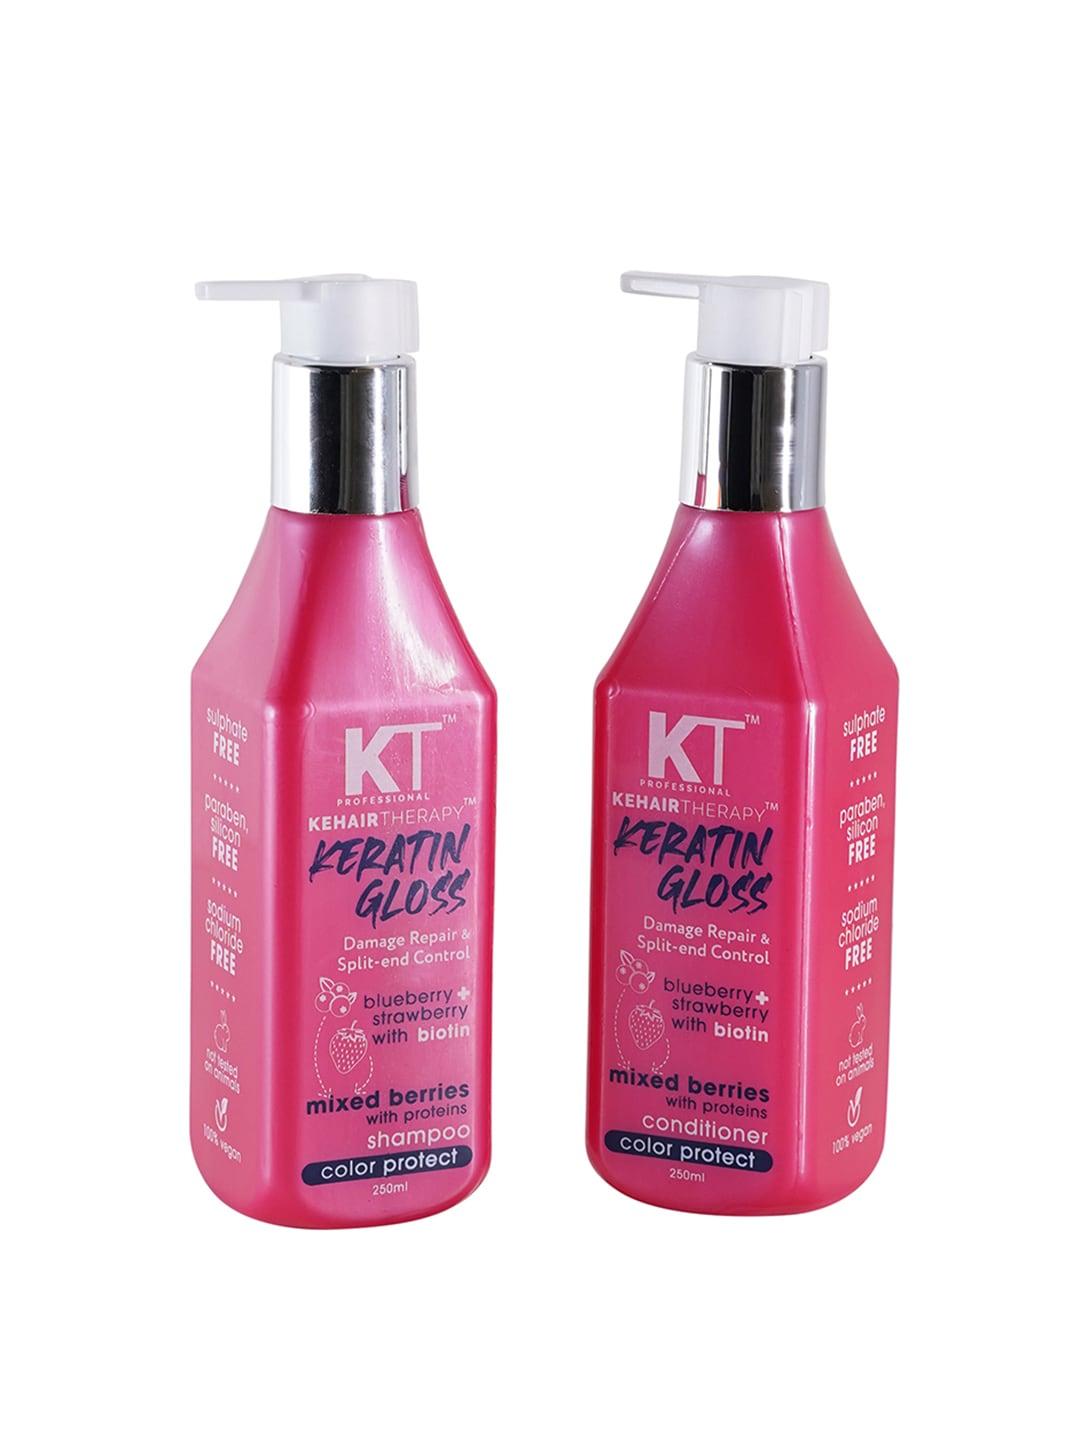 KEHAIRTHERAPY Set of 2 KT Professional Keratin Damage Control Shampoo & Conditioner